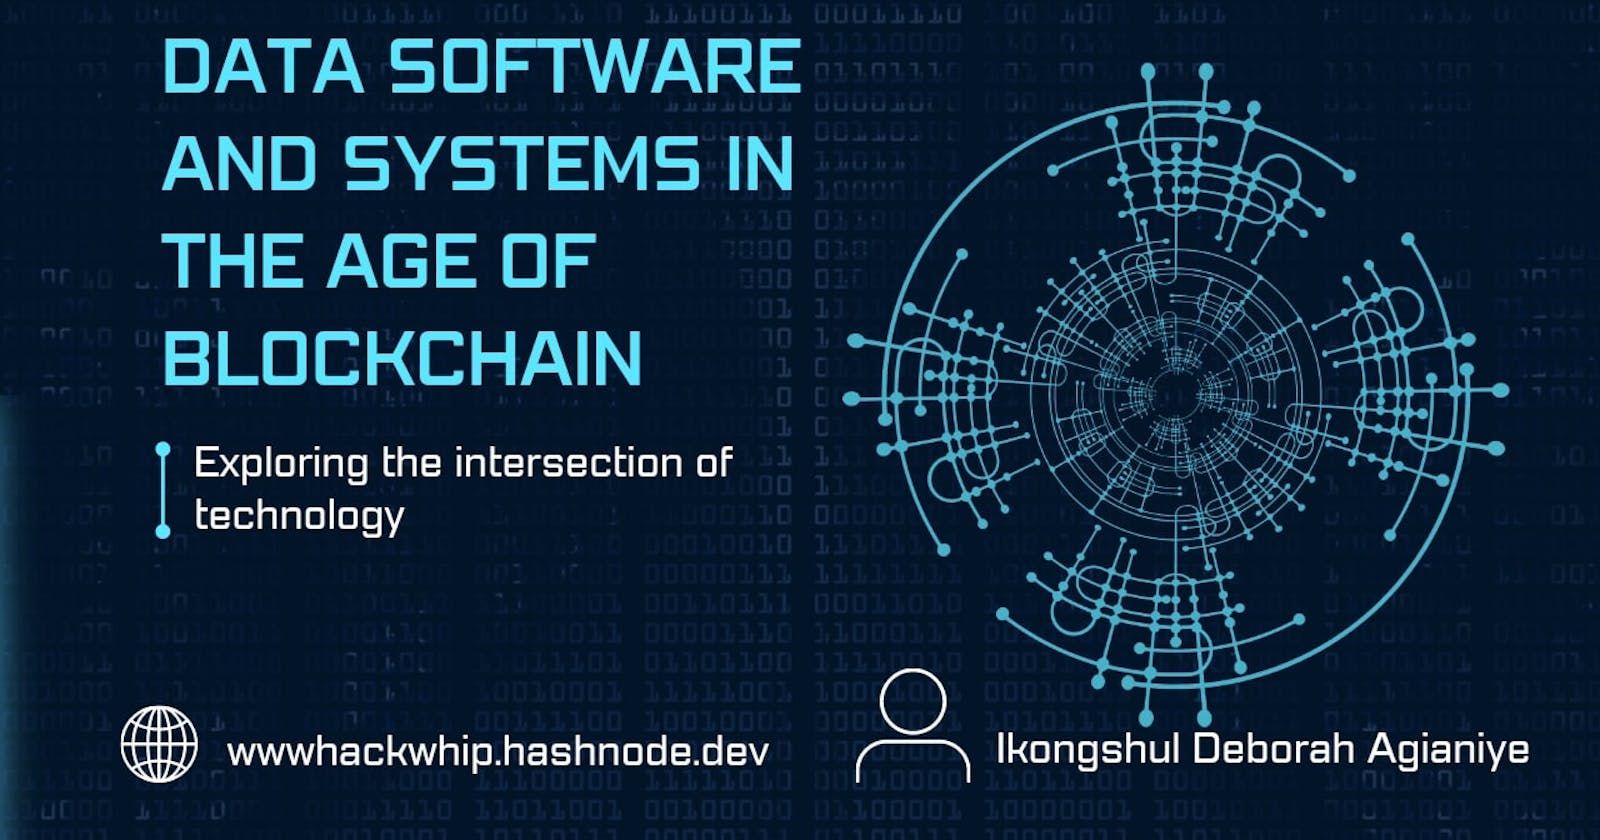 Data systems and software in the age of Blockchain